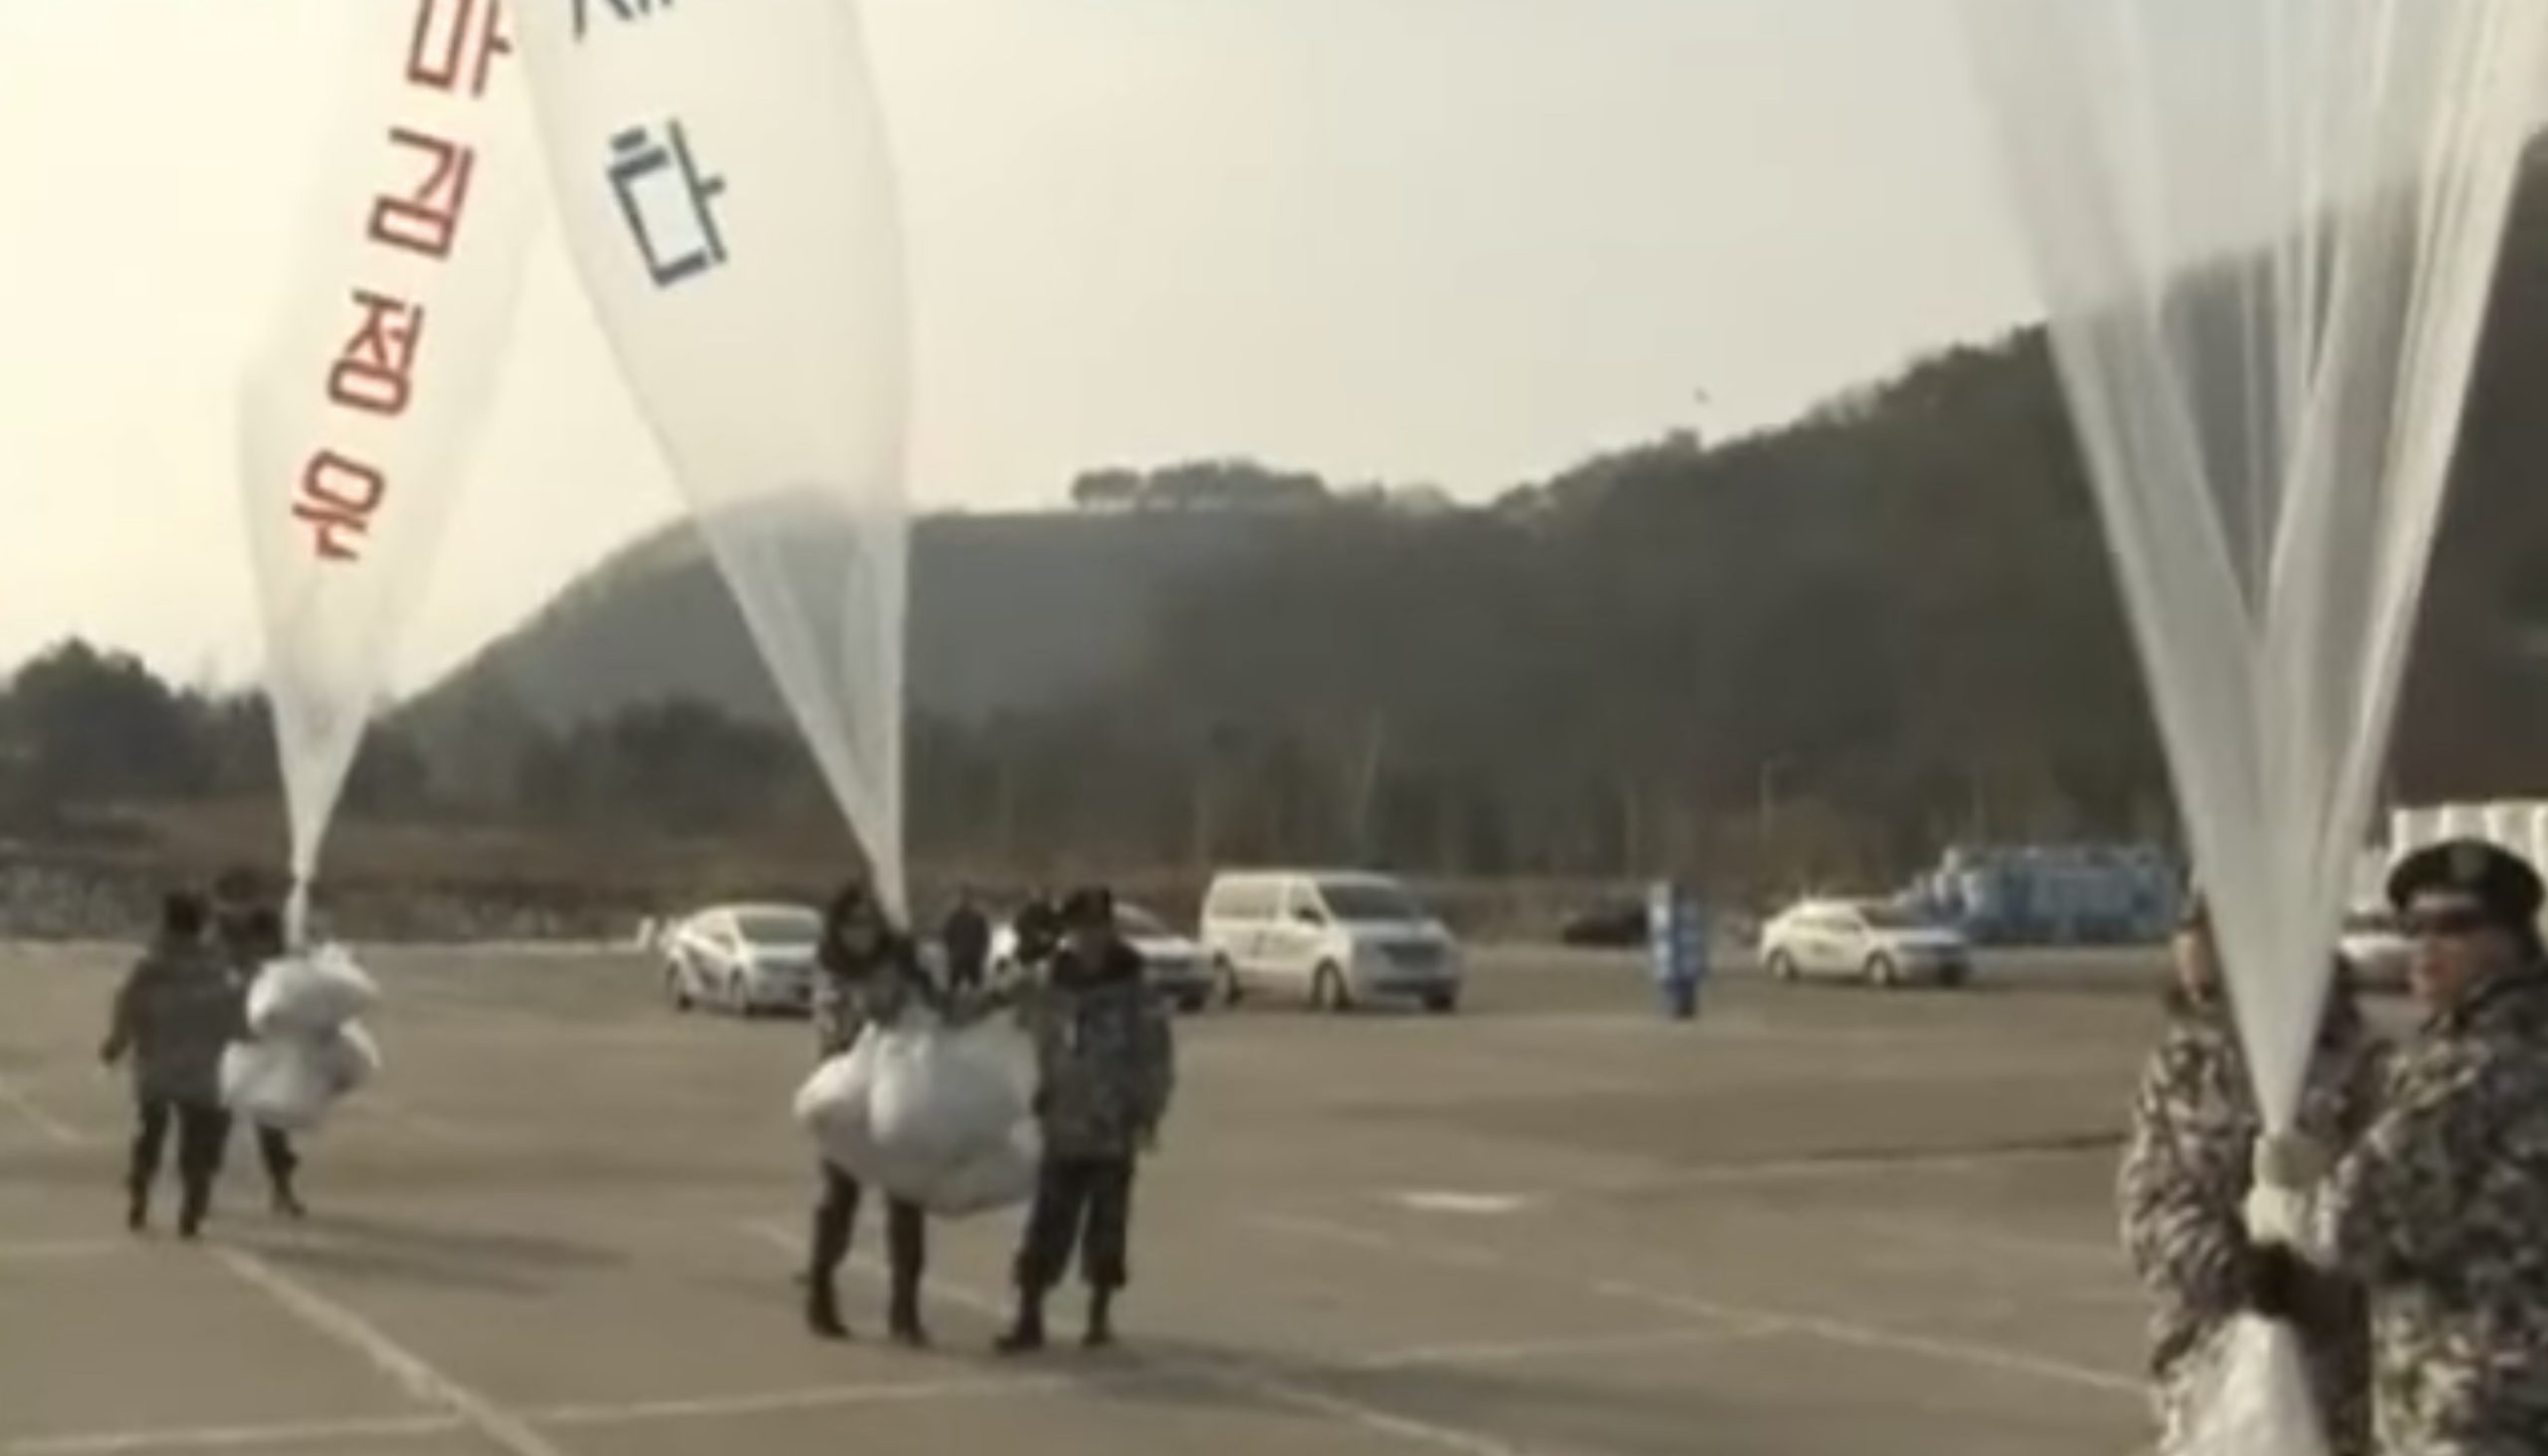 South Korea Should Expand Free Speech on the Peninsula, Not Reduce It - Baloon Leaflets - Human Rights